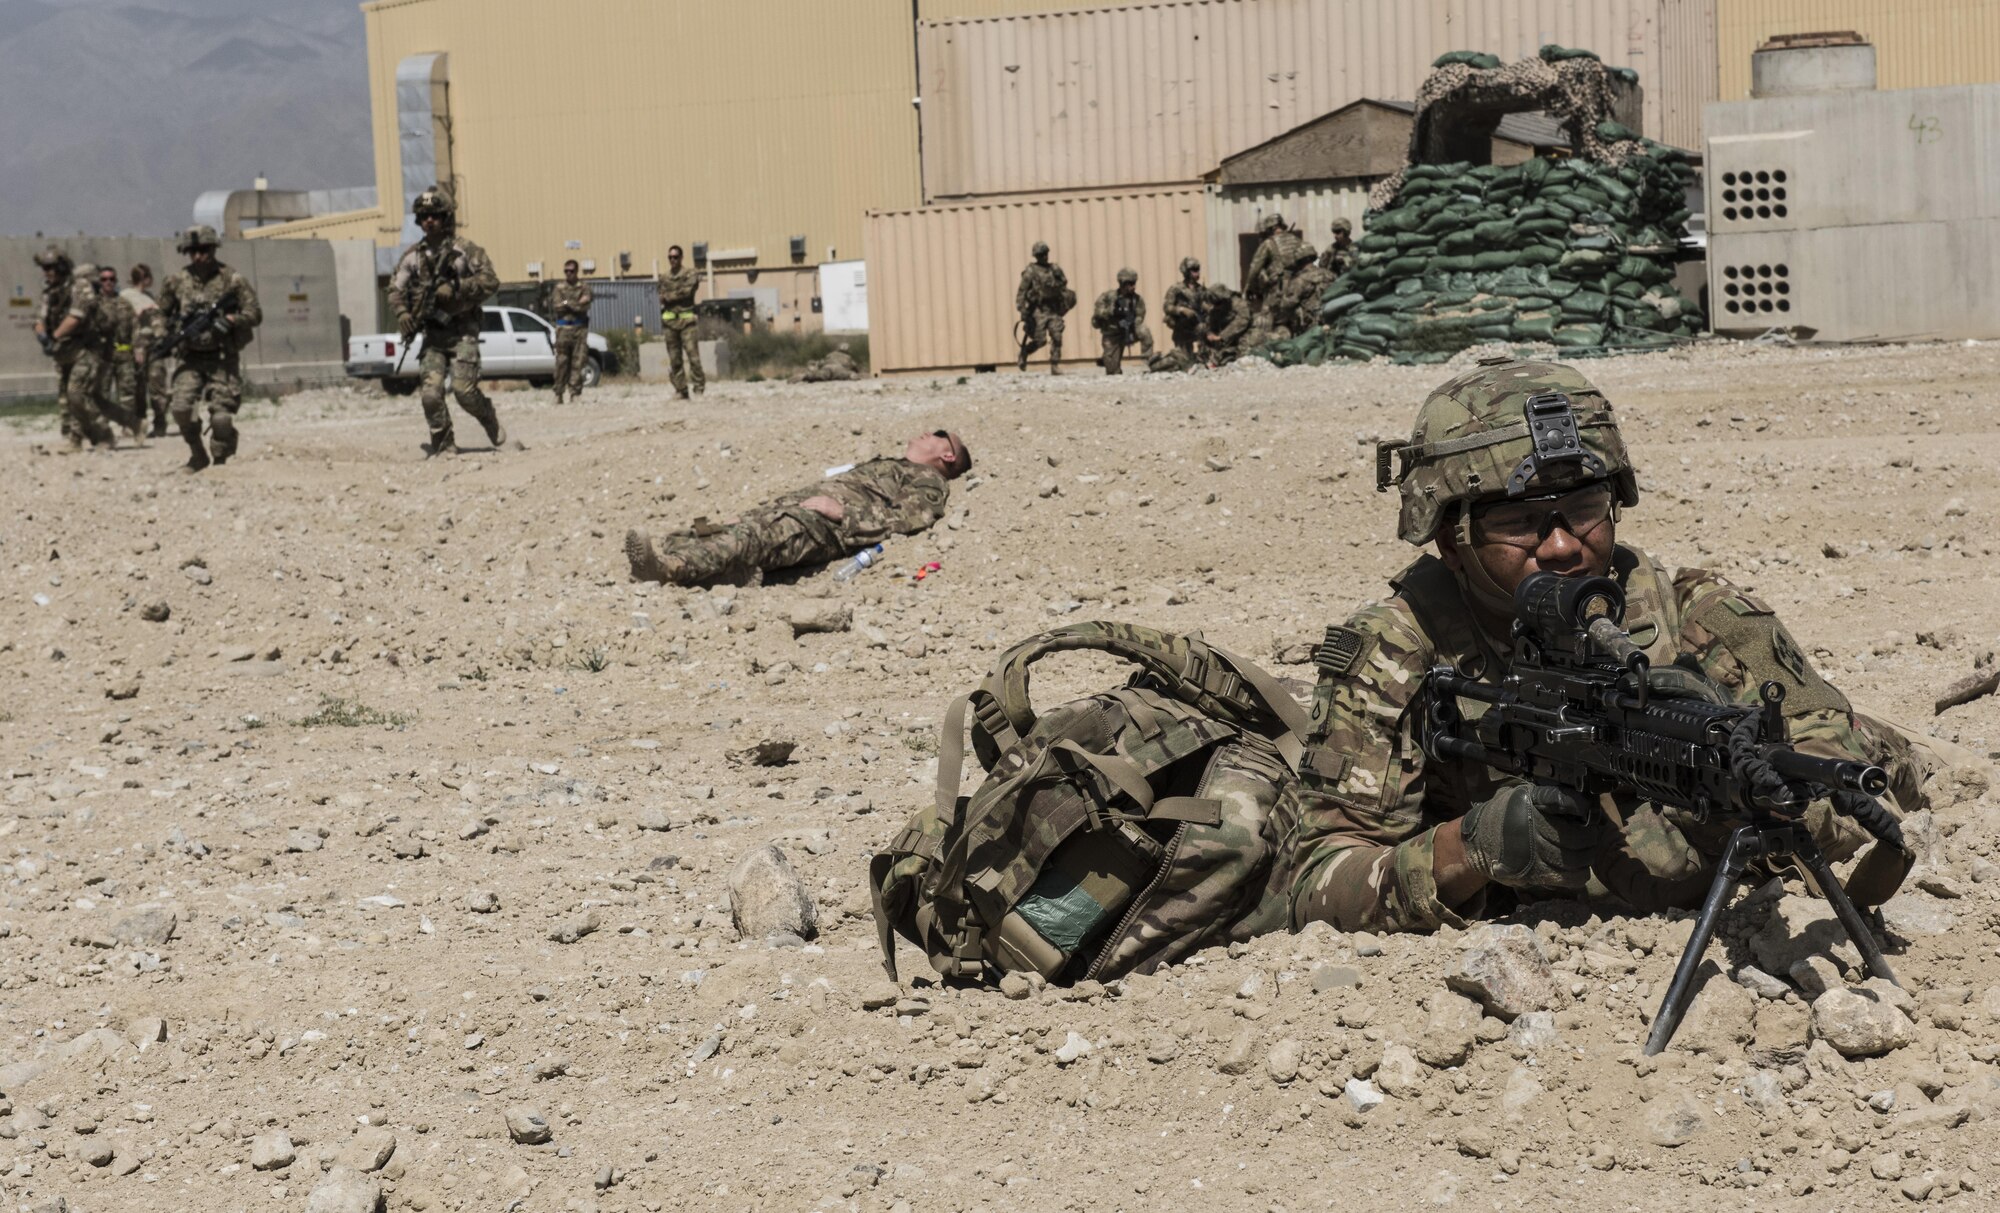 A U.S. Army soldier guards the perimeter during a mass casualty and extraction exercise with Airmen from the 83rd Expeditionary Rescue Squadron, June 16, 2016 at Bagram Airfield, Afghanistan. Patrol teams provide 360 degree security to combat enemy forces and ensure rescue and extraction teams can attend to the wounded and get them to a safe location. (U.S. Air Force photo by Tech. Sgt. Tyrona Lawson)